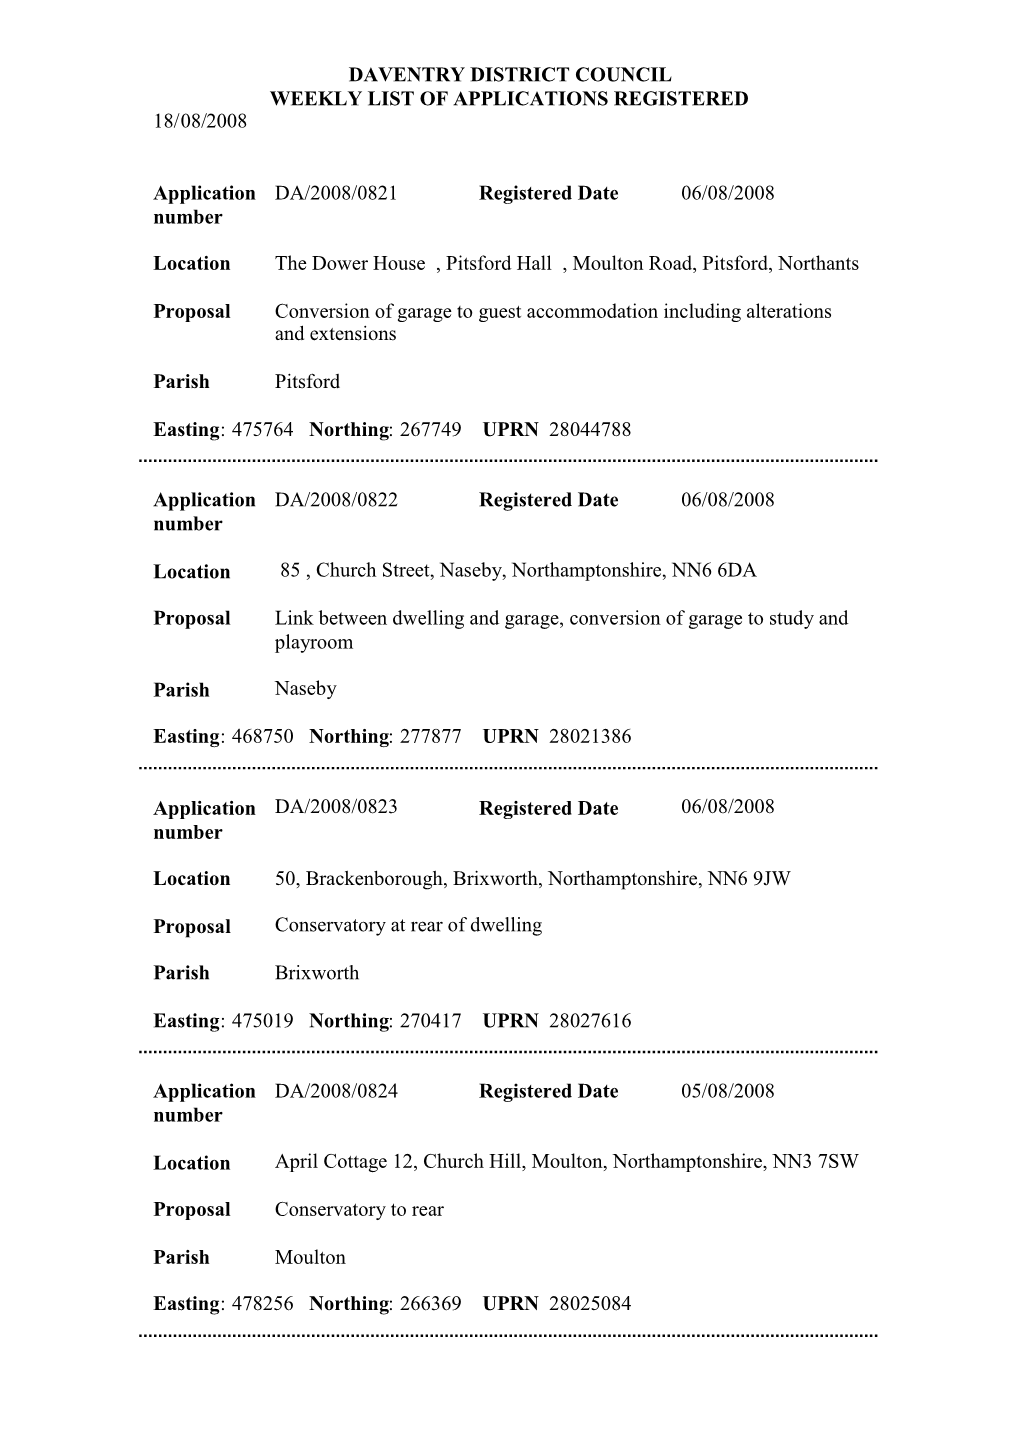 Daventry District Council Weekly List of Applications Registered 18/08/2008